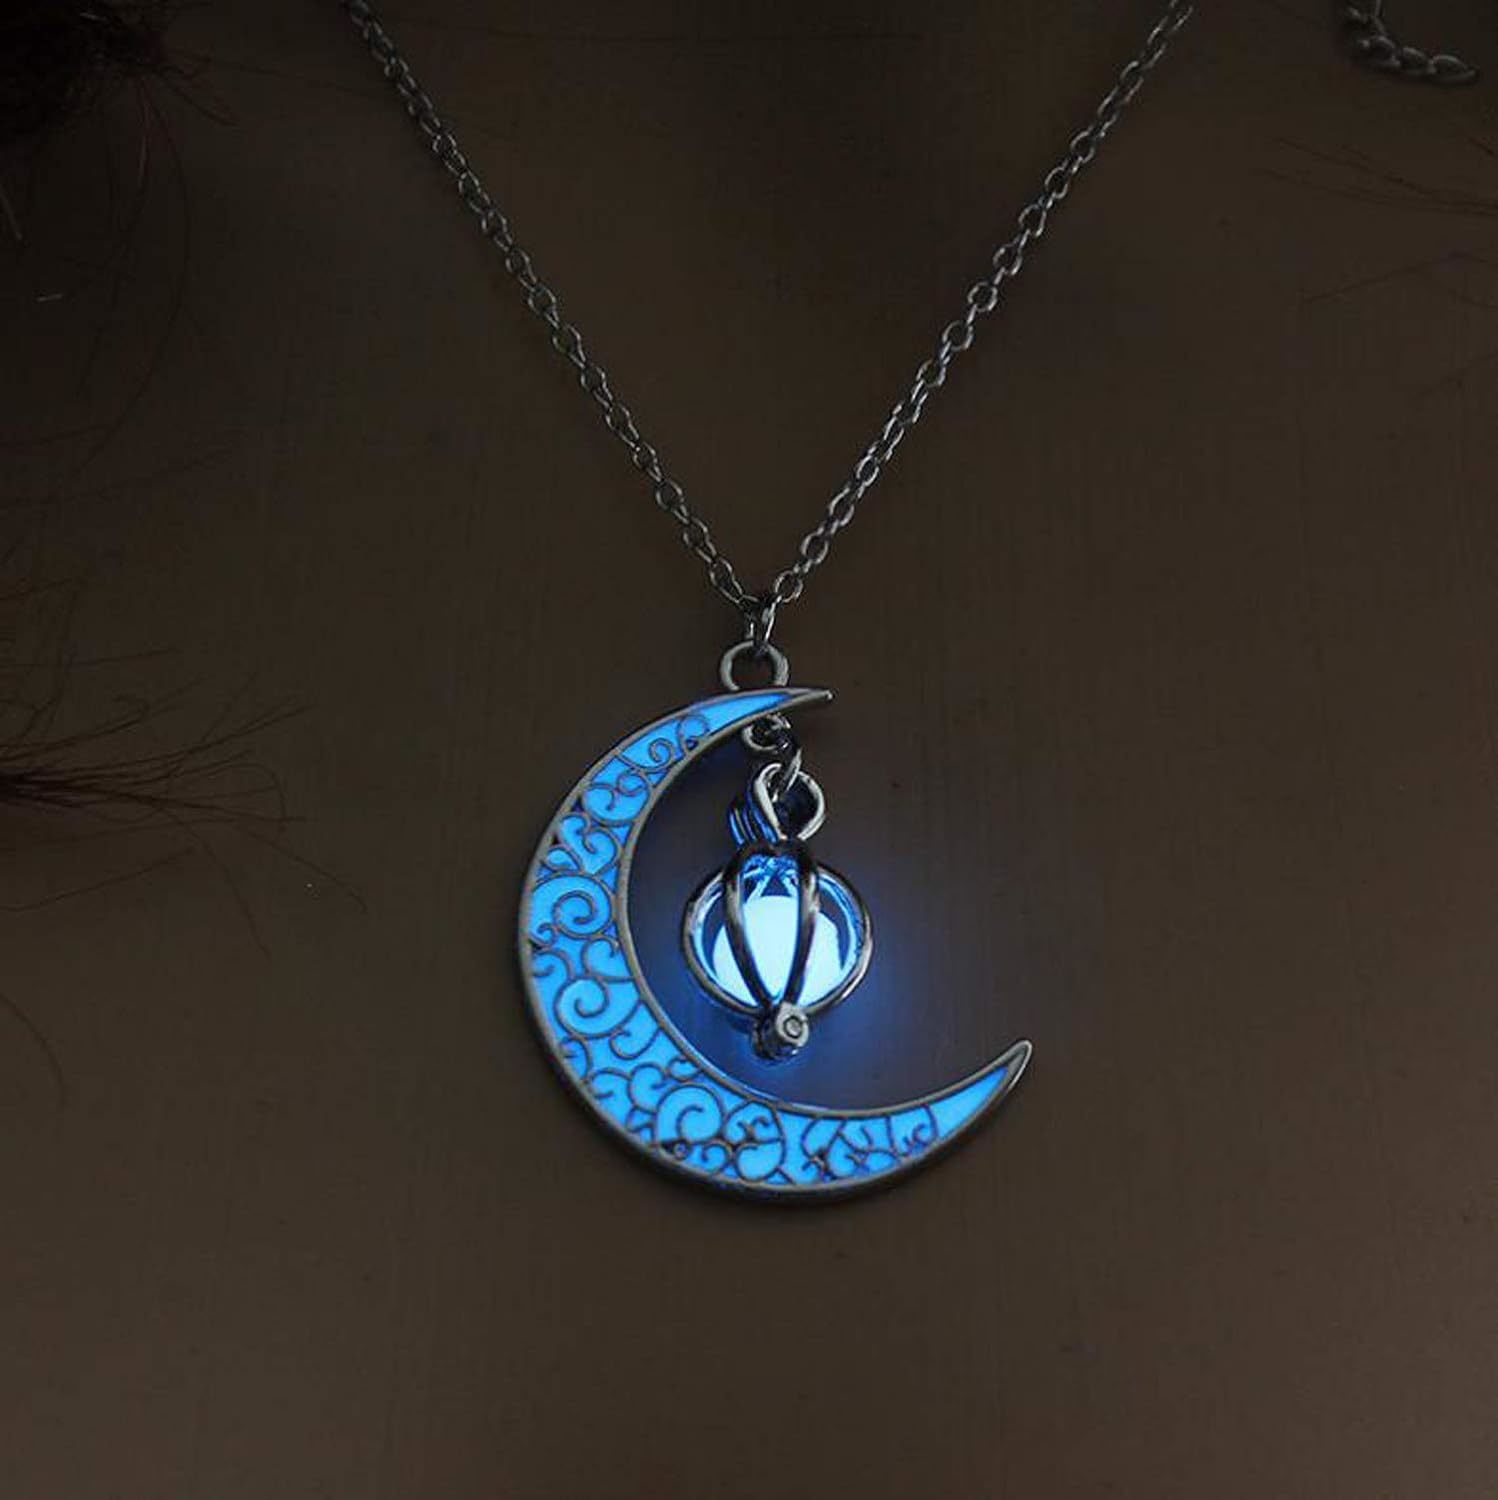 Primary image for Glow in The Dark Crescent Moon and Orb Necklace